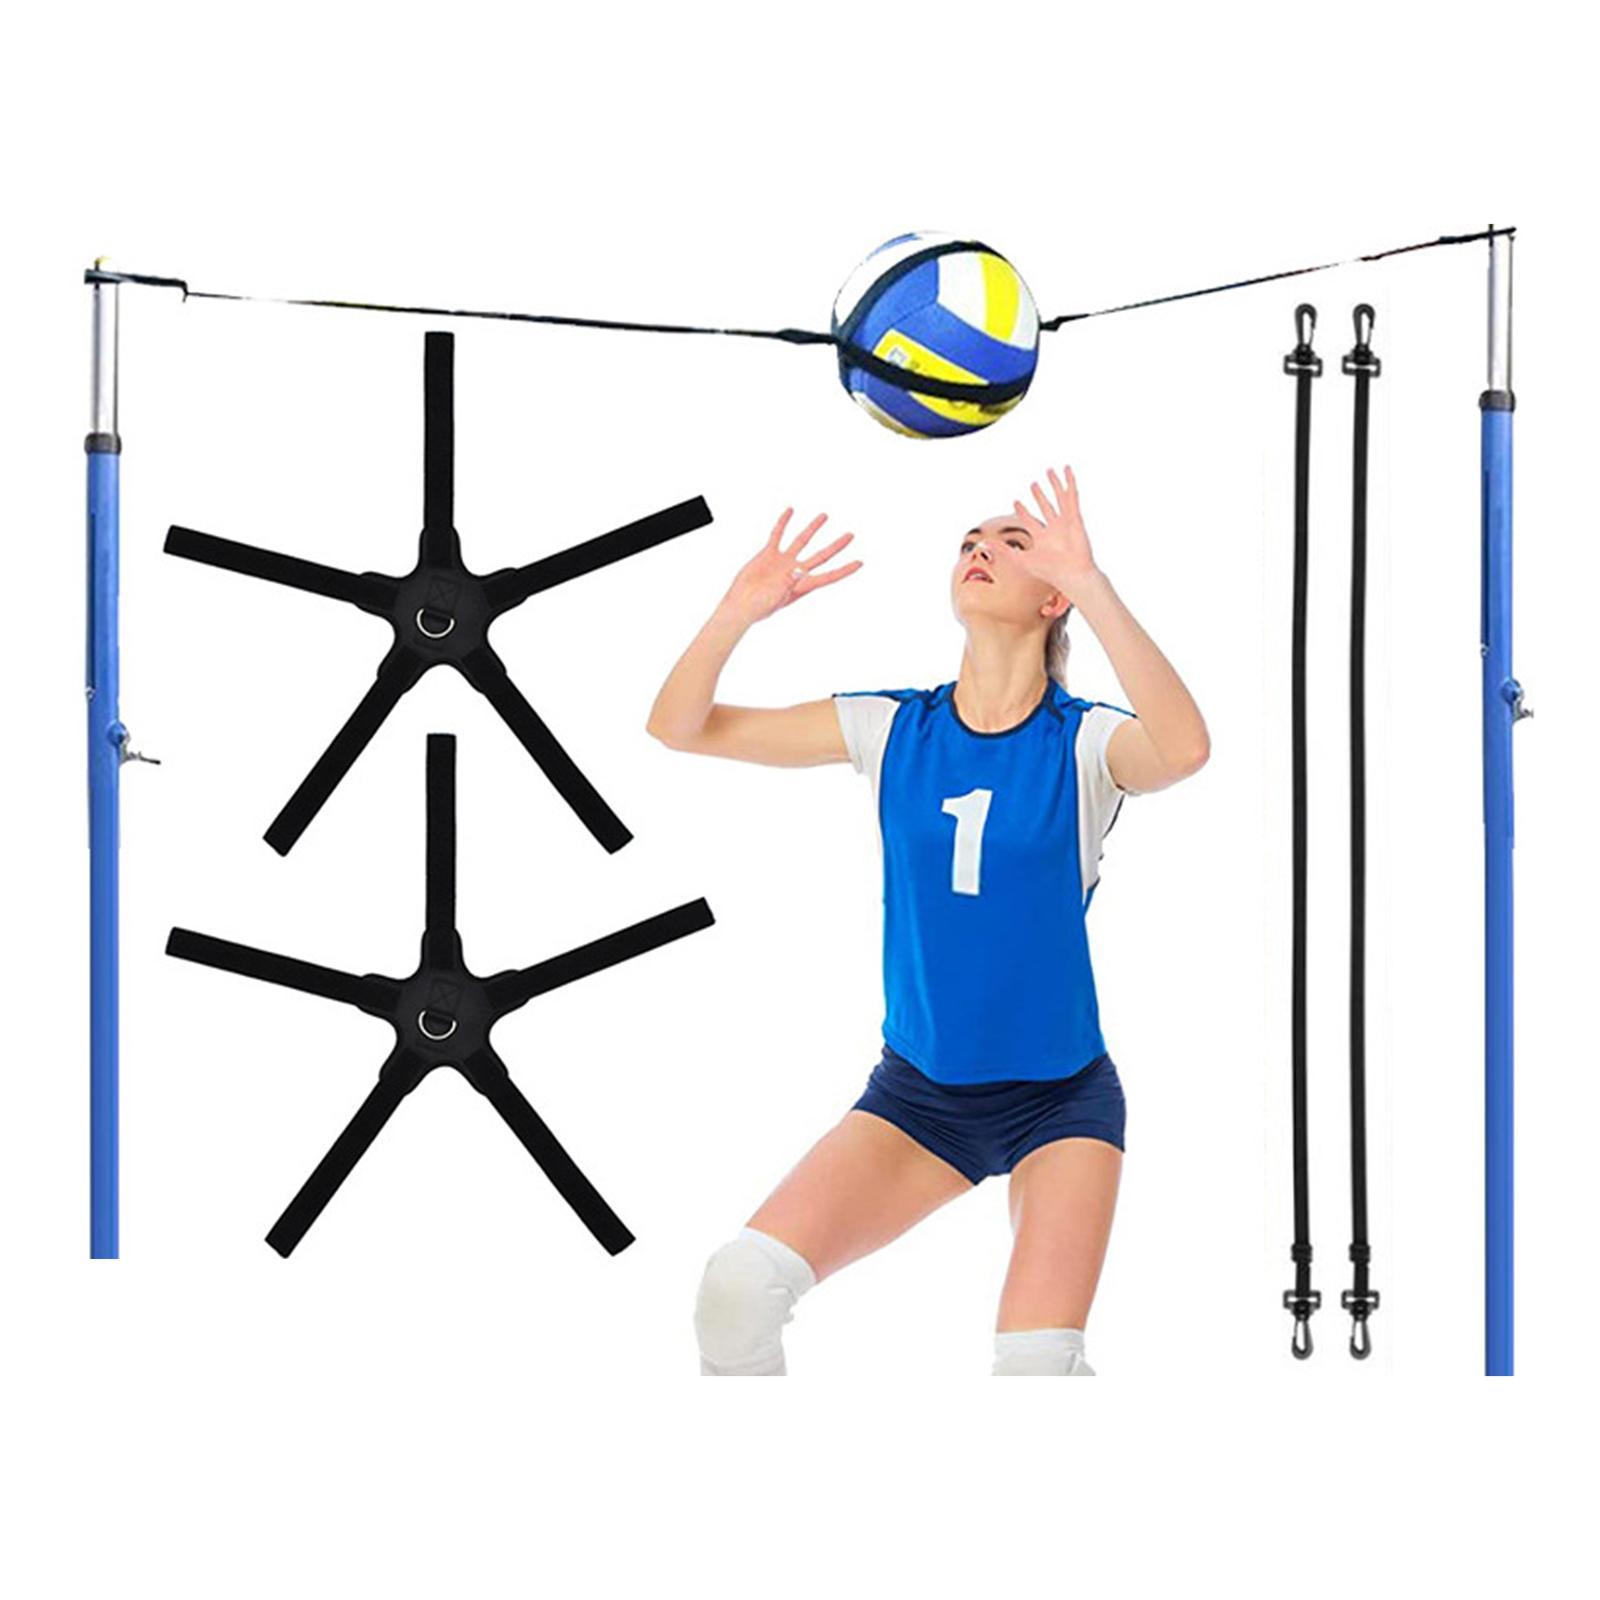 Volleyball Training Equipment Adjustable Training Belt for Beginners Playing